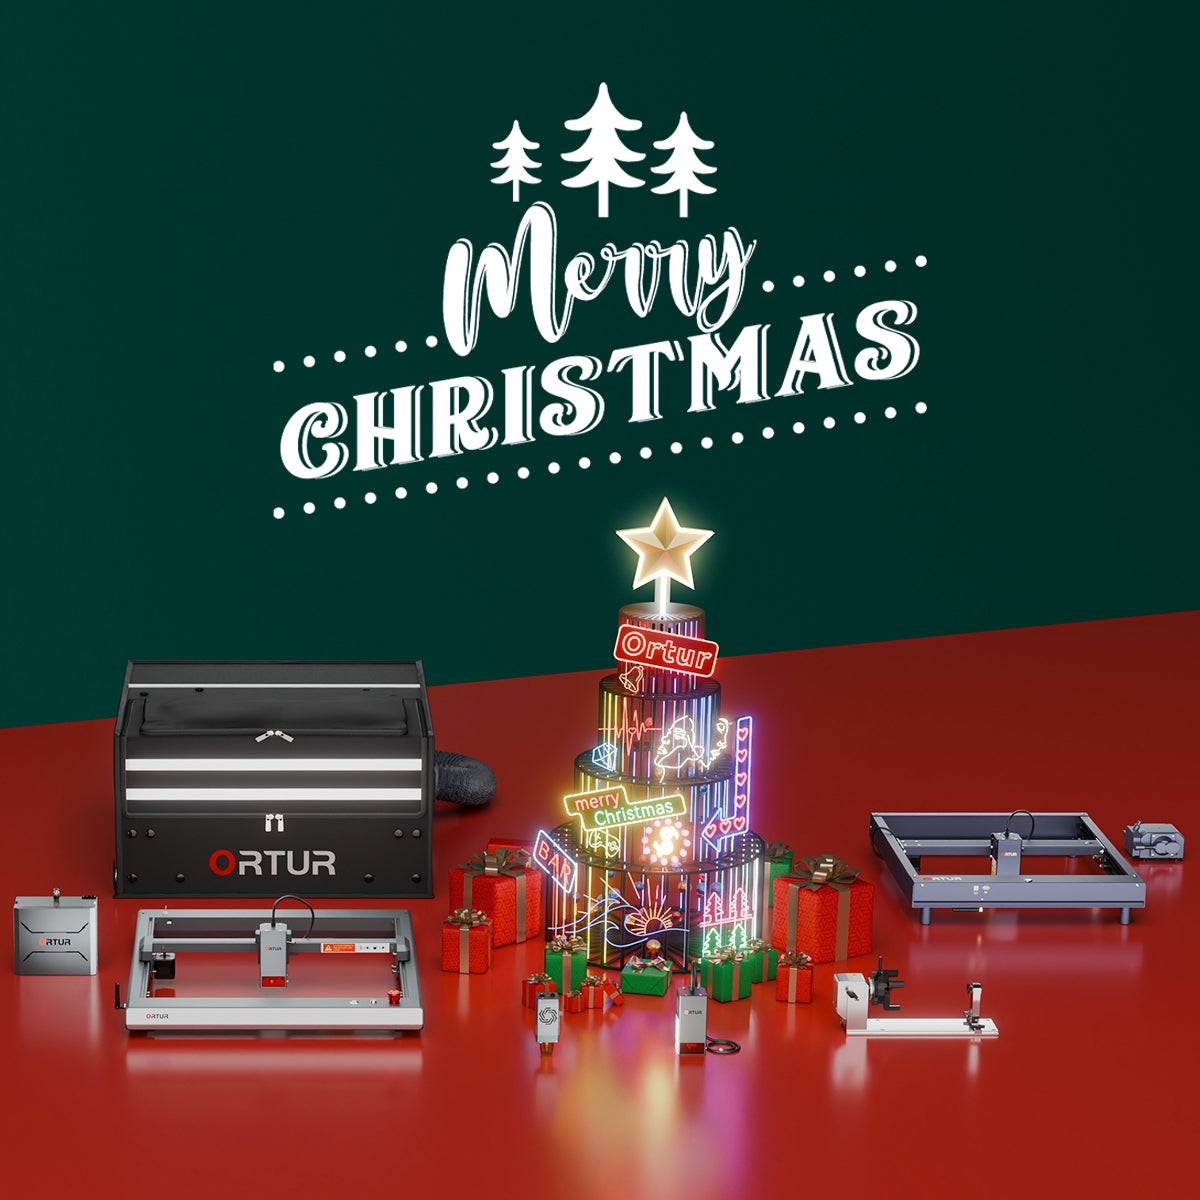 This Christmas Season, Engraving Warmth with Ortur